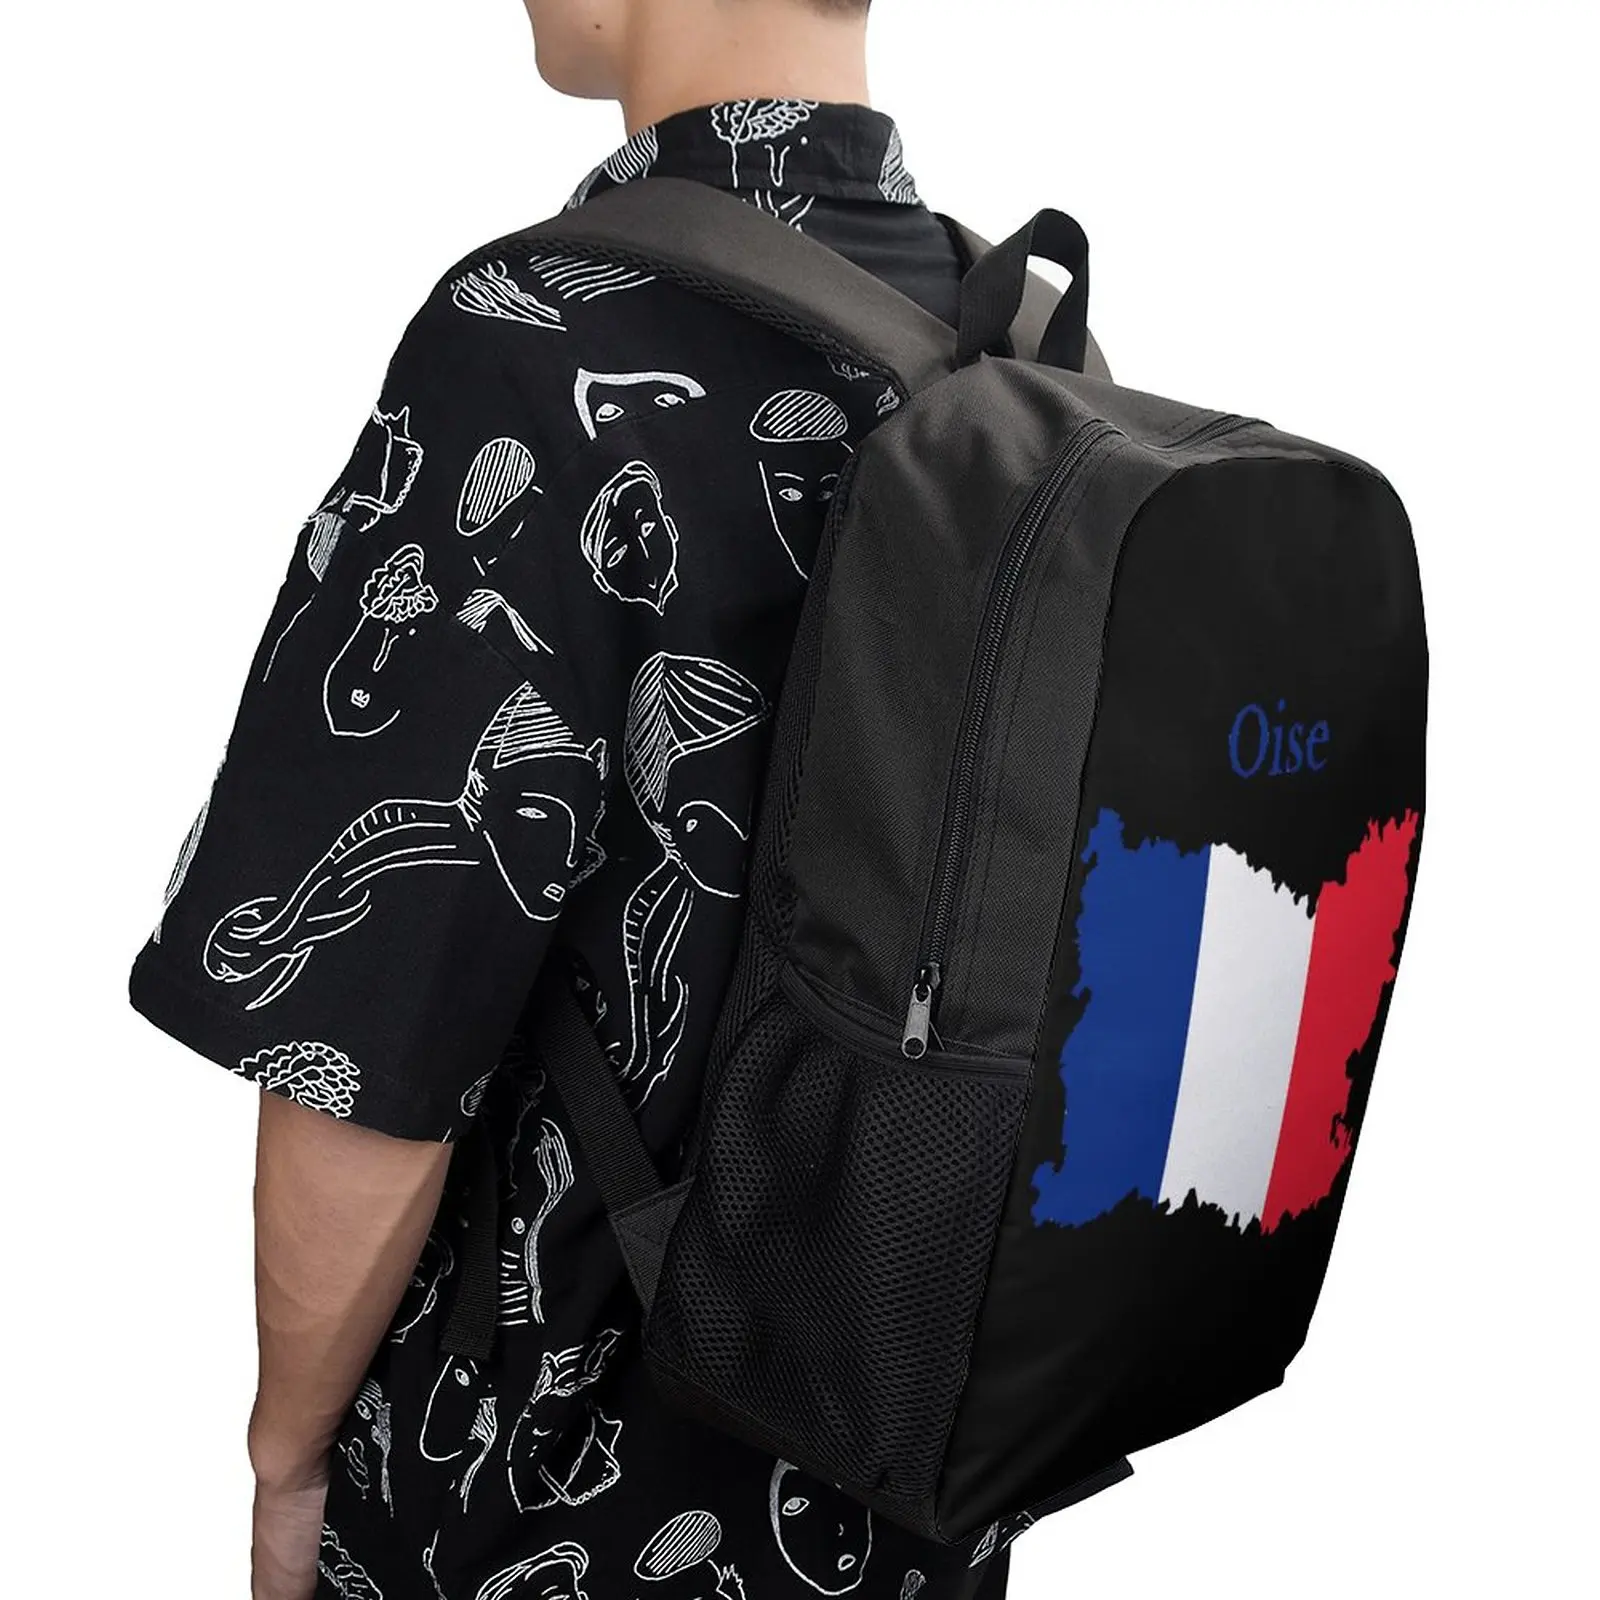 17 Inch Shoulder Backpack Oise Map France French Departmenthk Durable Graphic Cool Cozy  Sports Activities Field Pack